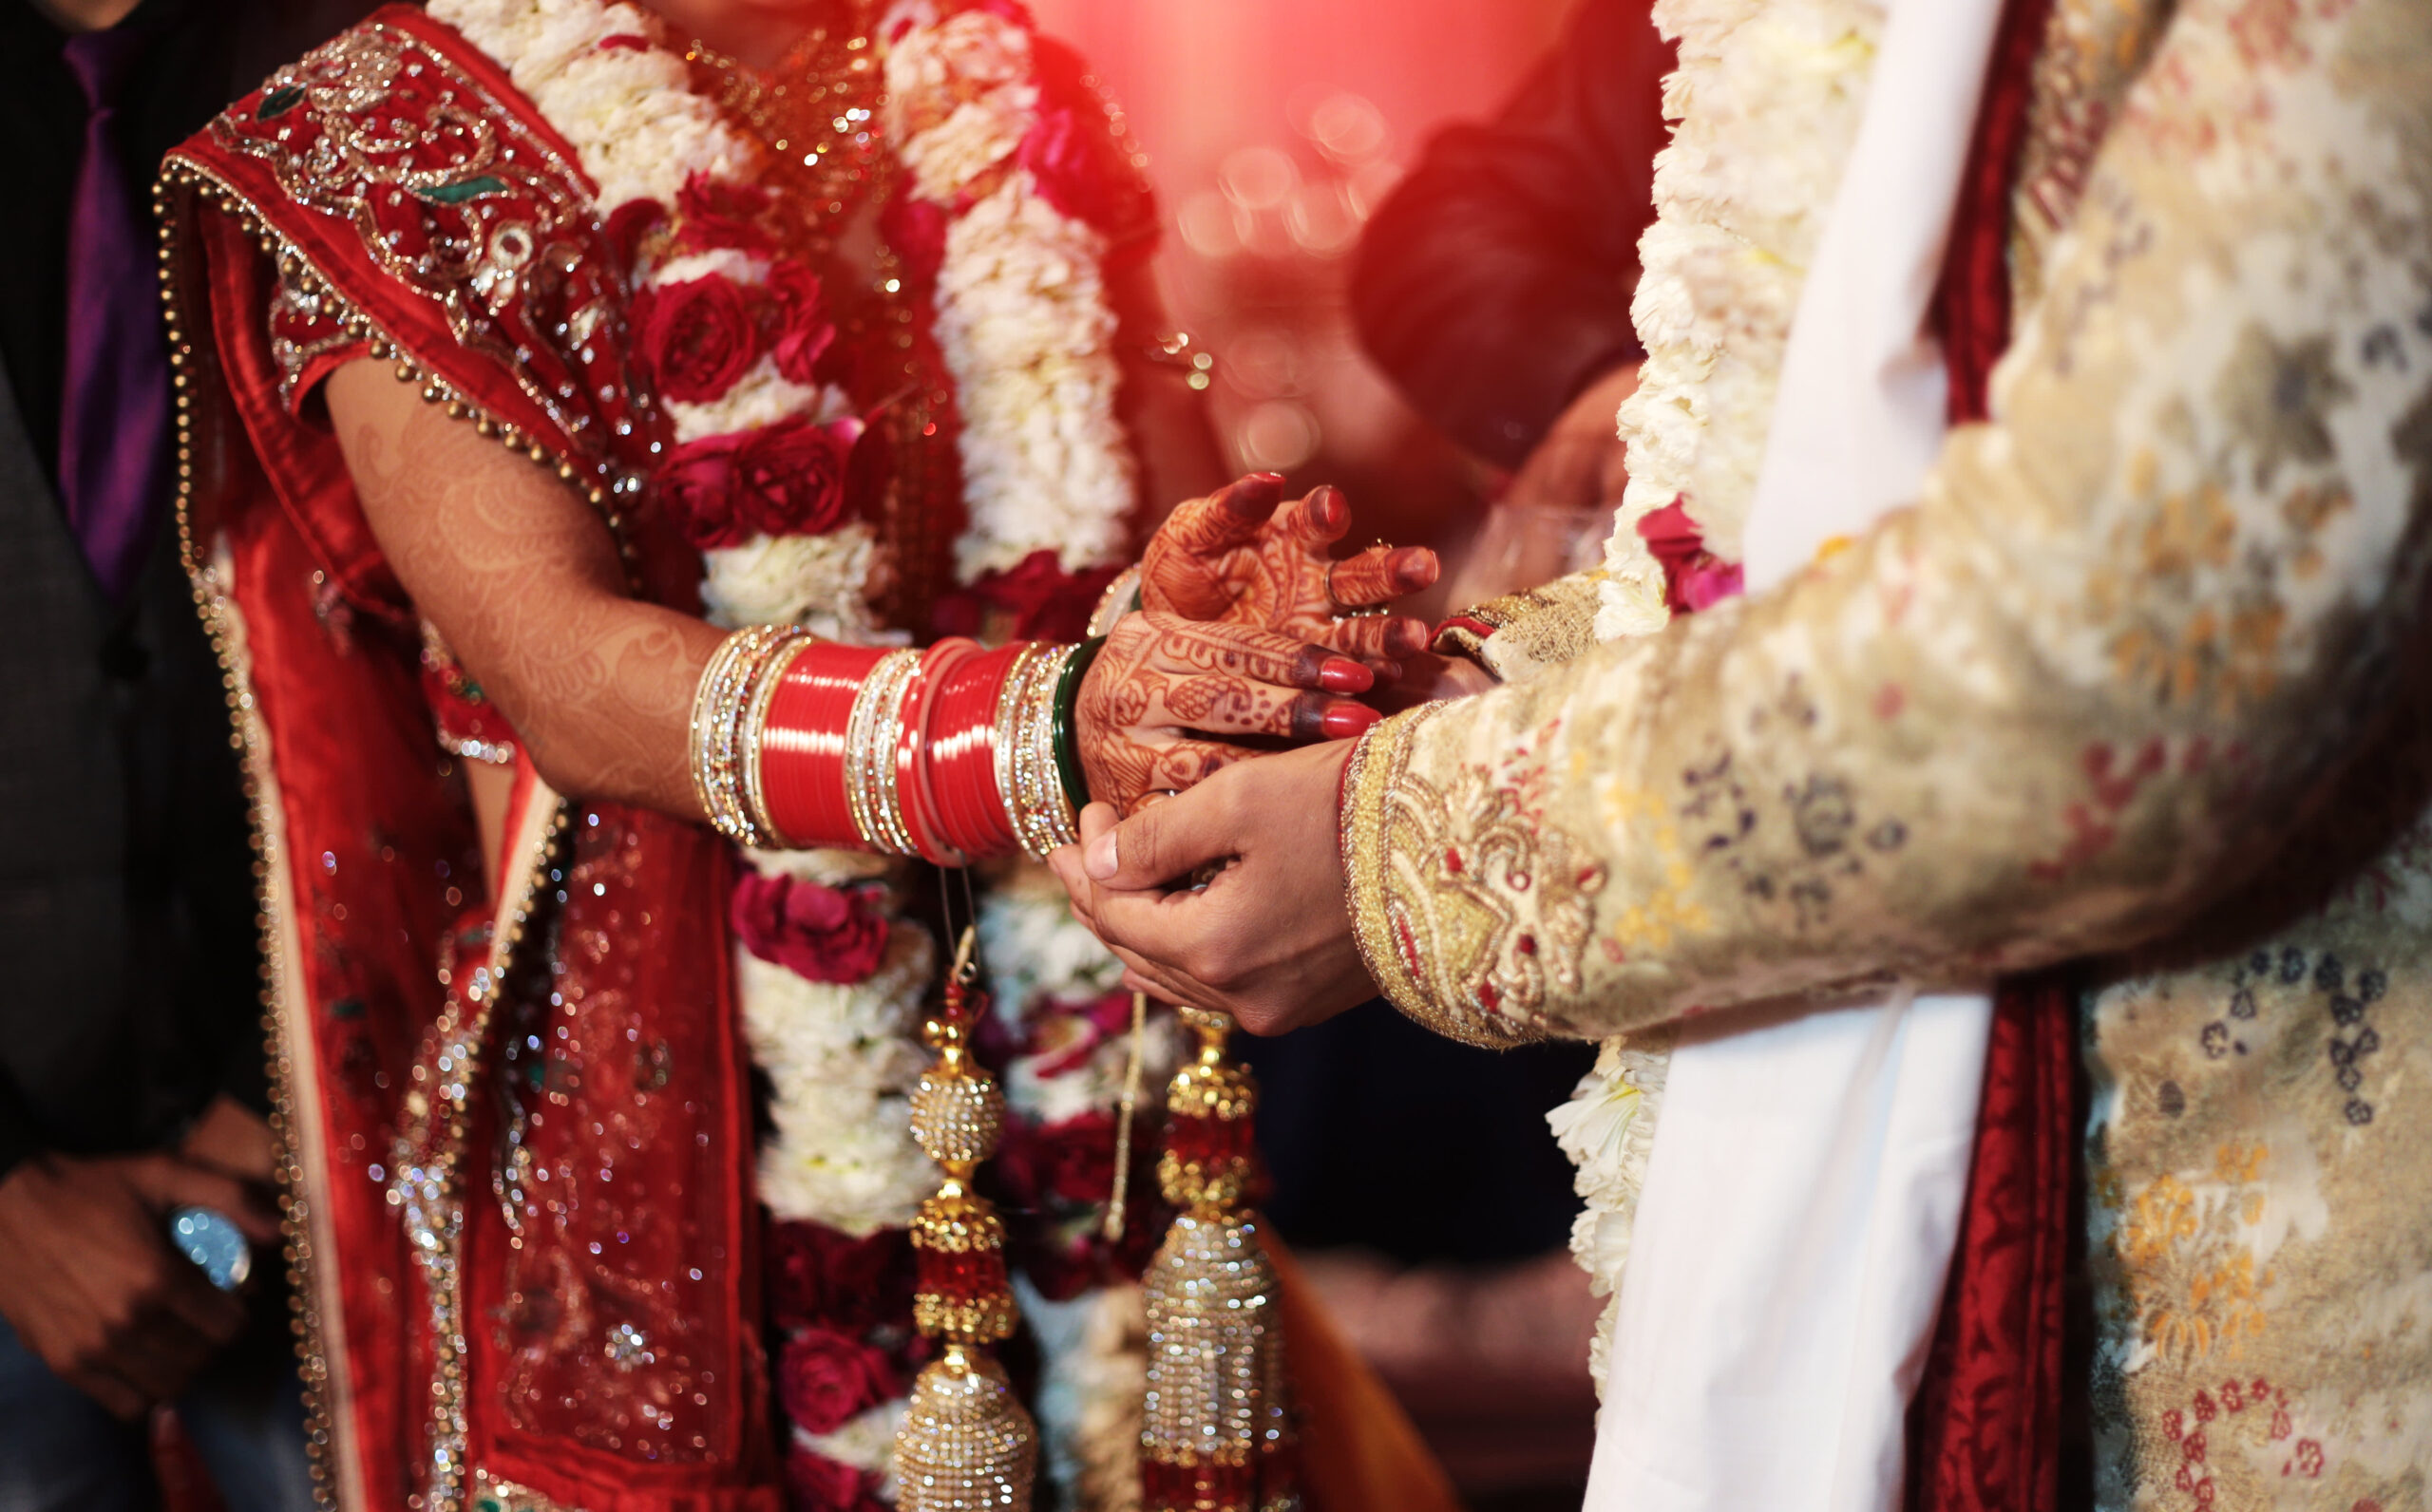 India’s wedding season is here, but for many it’s no longer the bigger